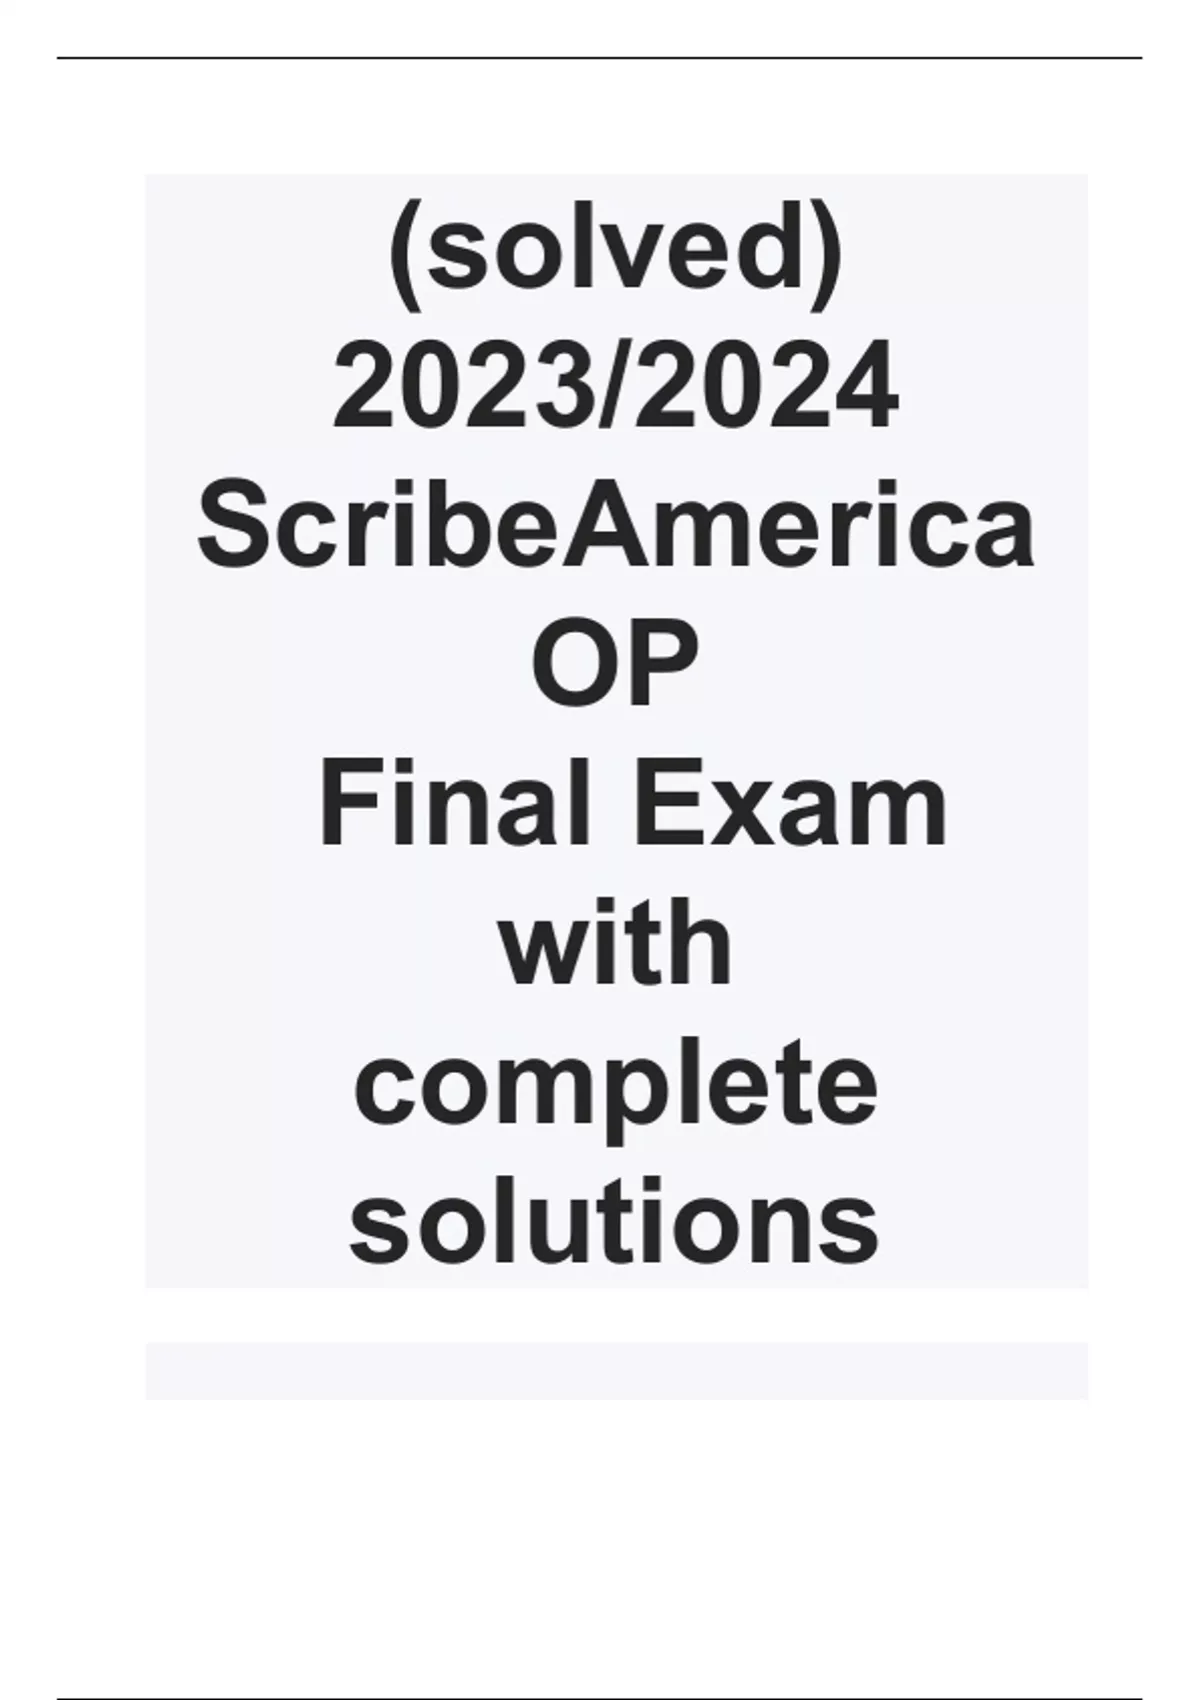 (solved 20232024) ScribeAmerica OP Final Exam with complete solutions Scribe America Stuvia US